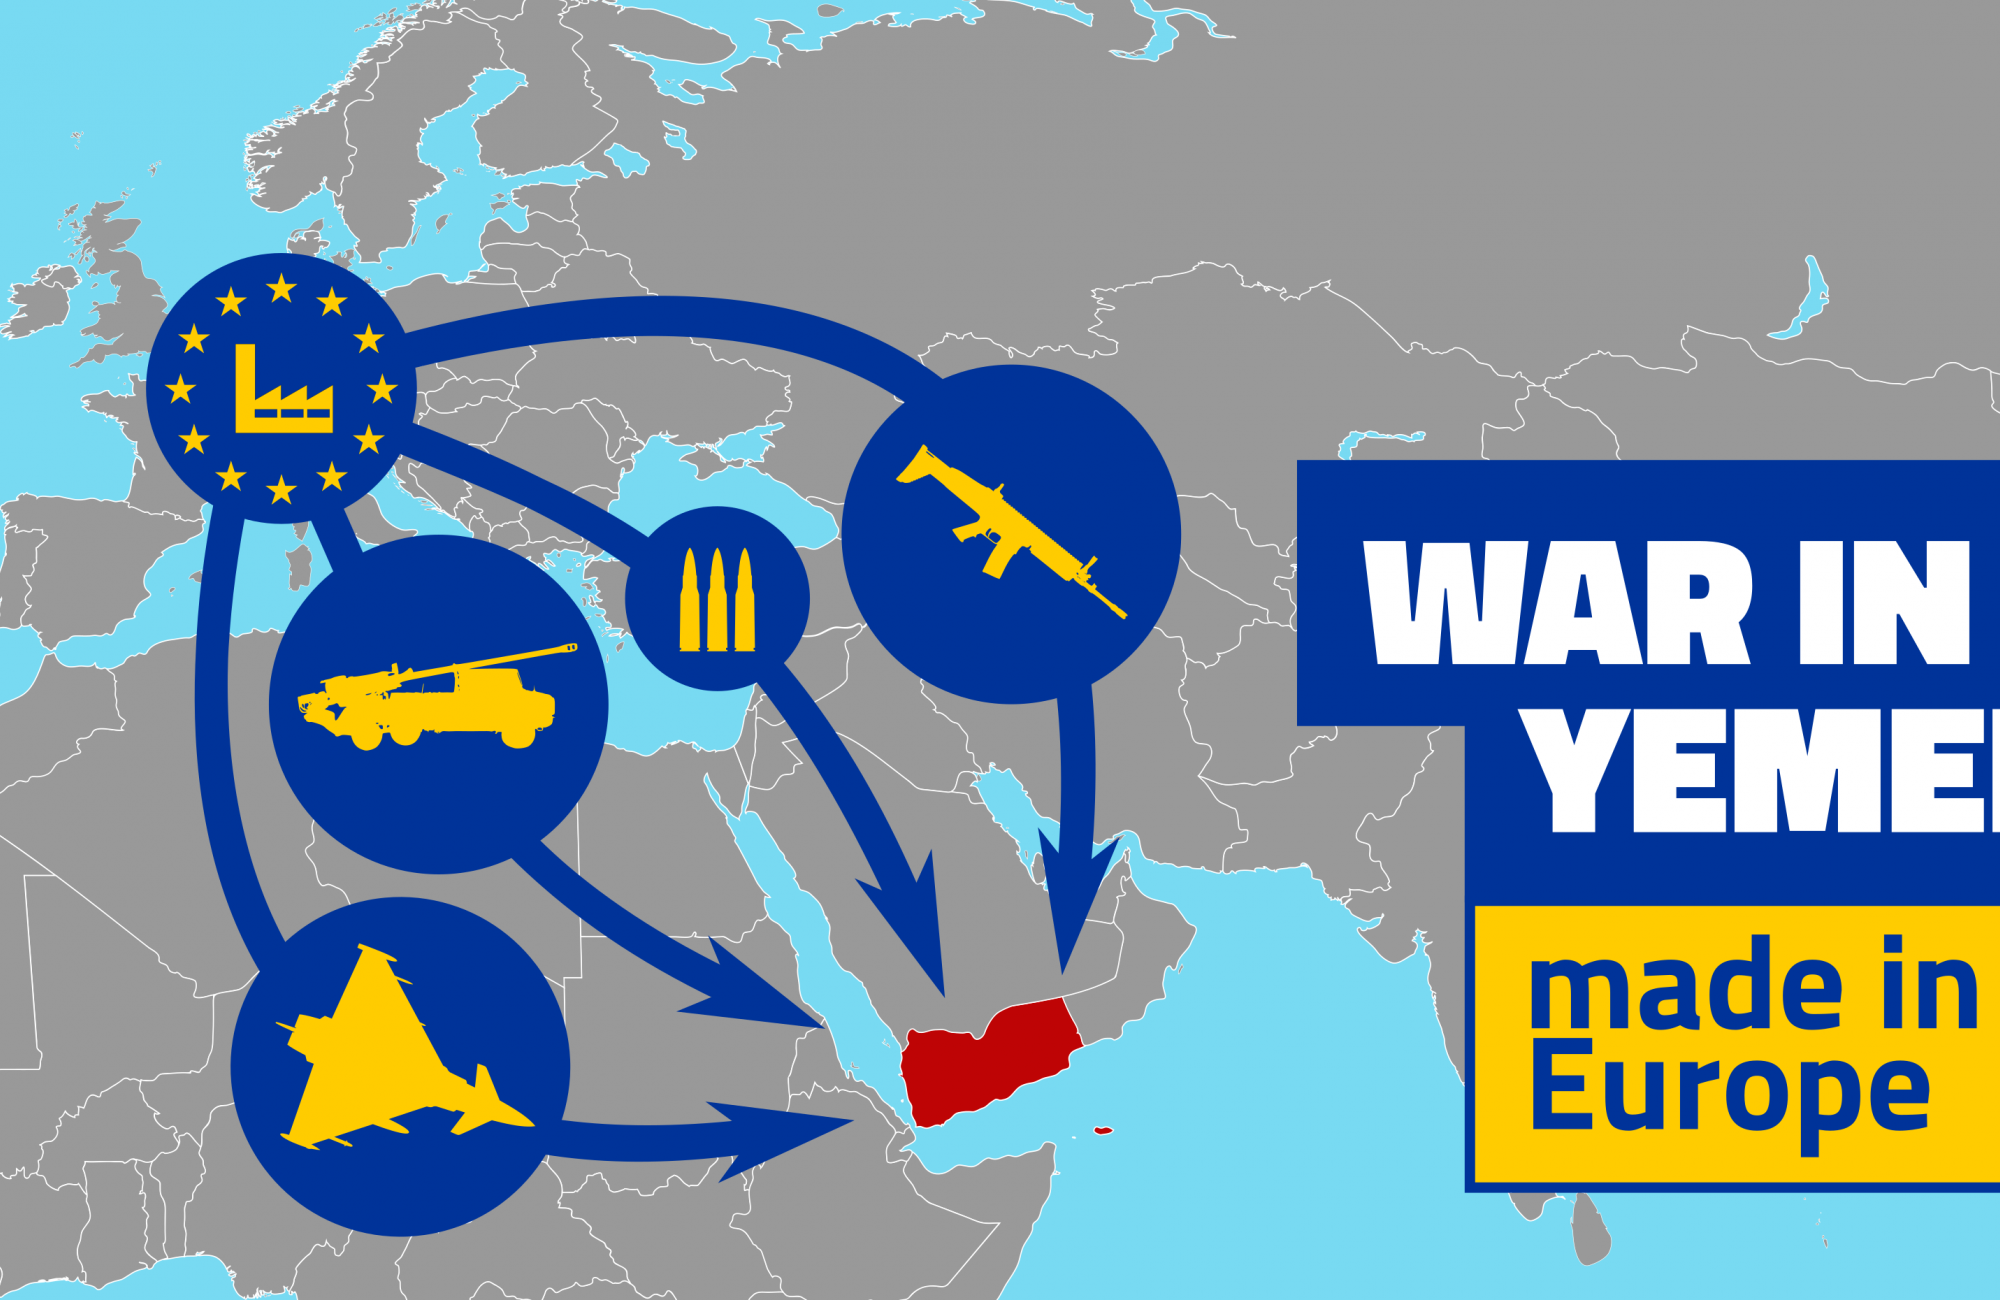 An infographic about the flow of European arms to the war in Yemen